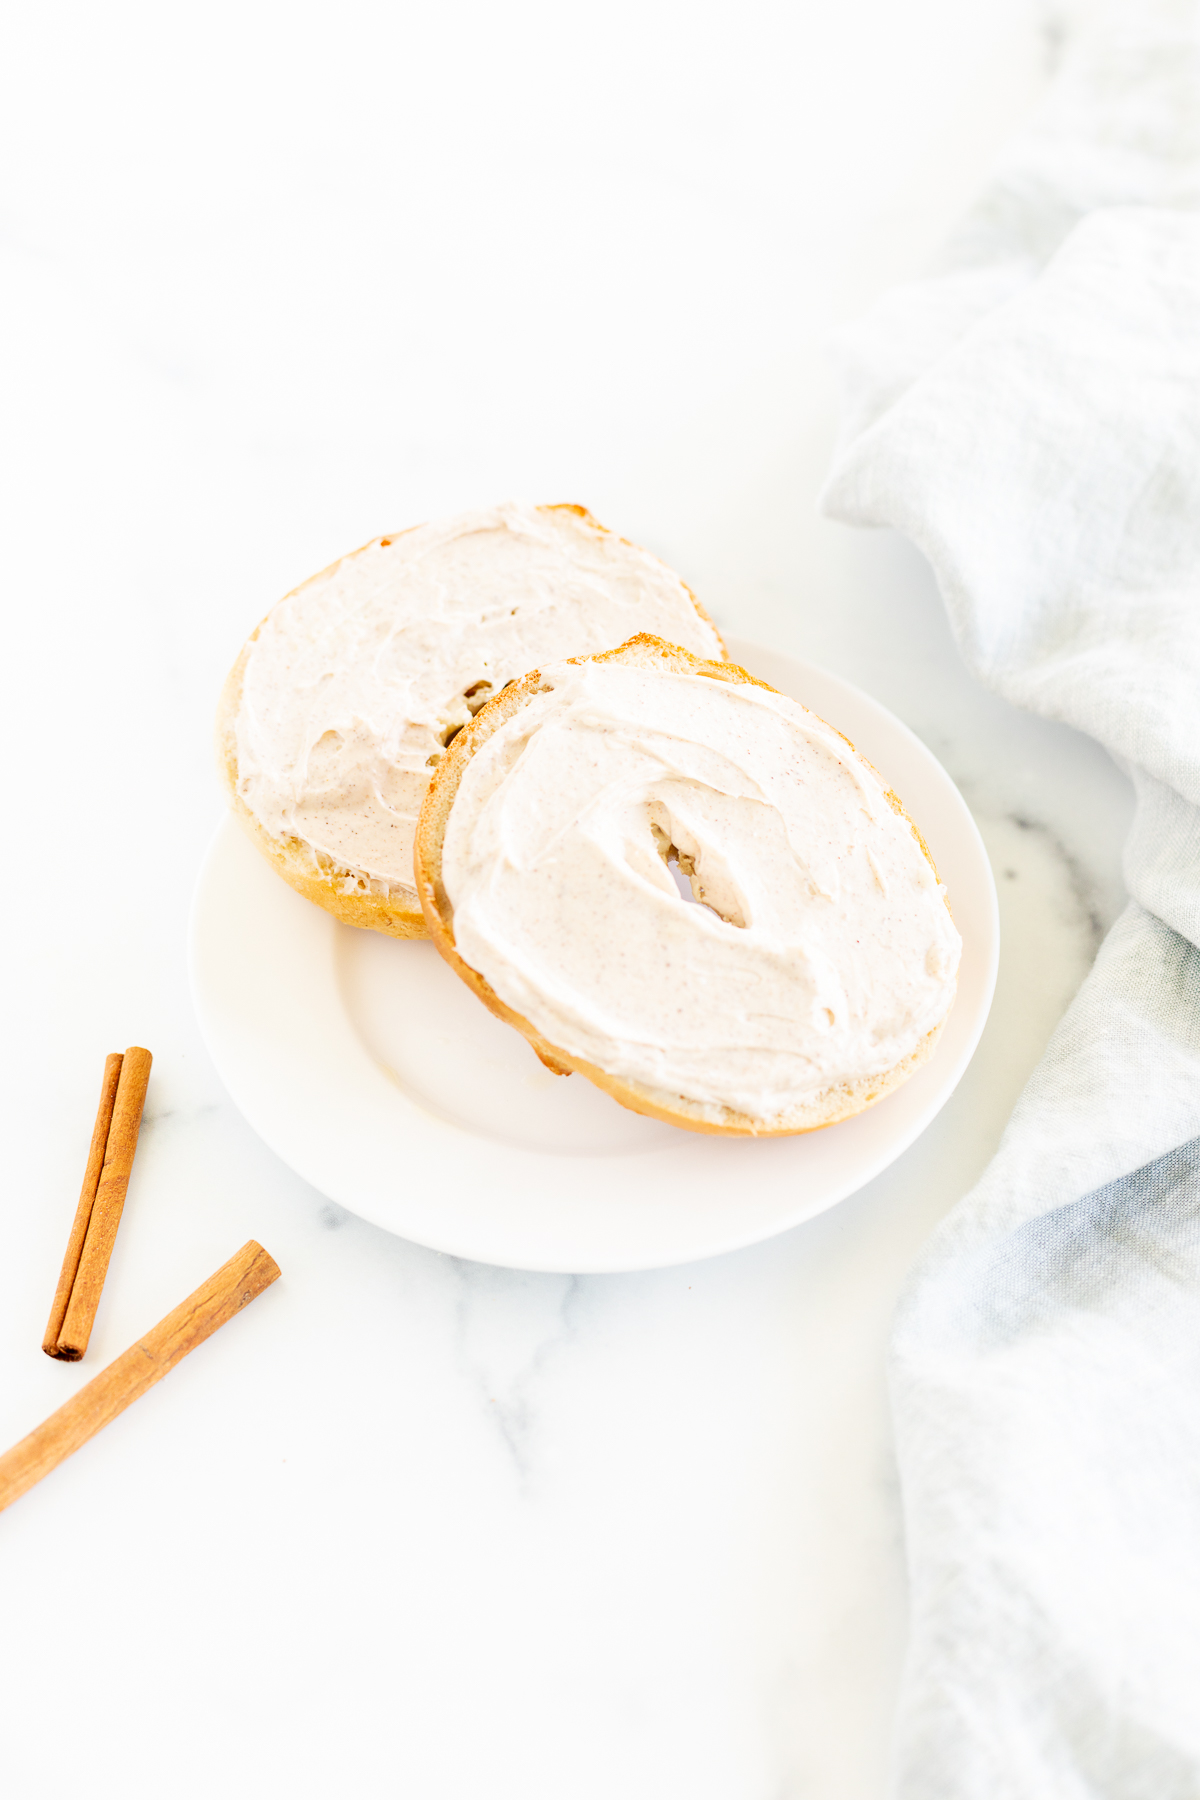 A bagel with cinnamon cream cheese and cinnamon sticks on a white plate.